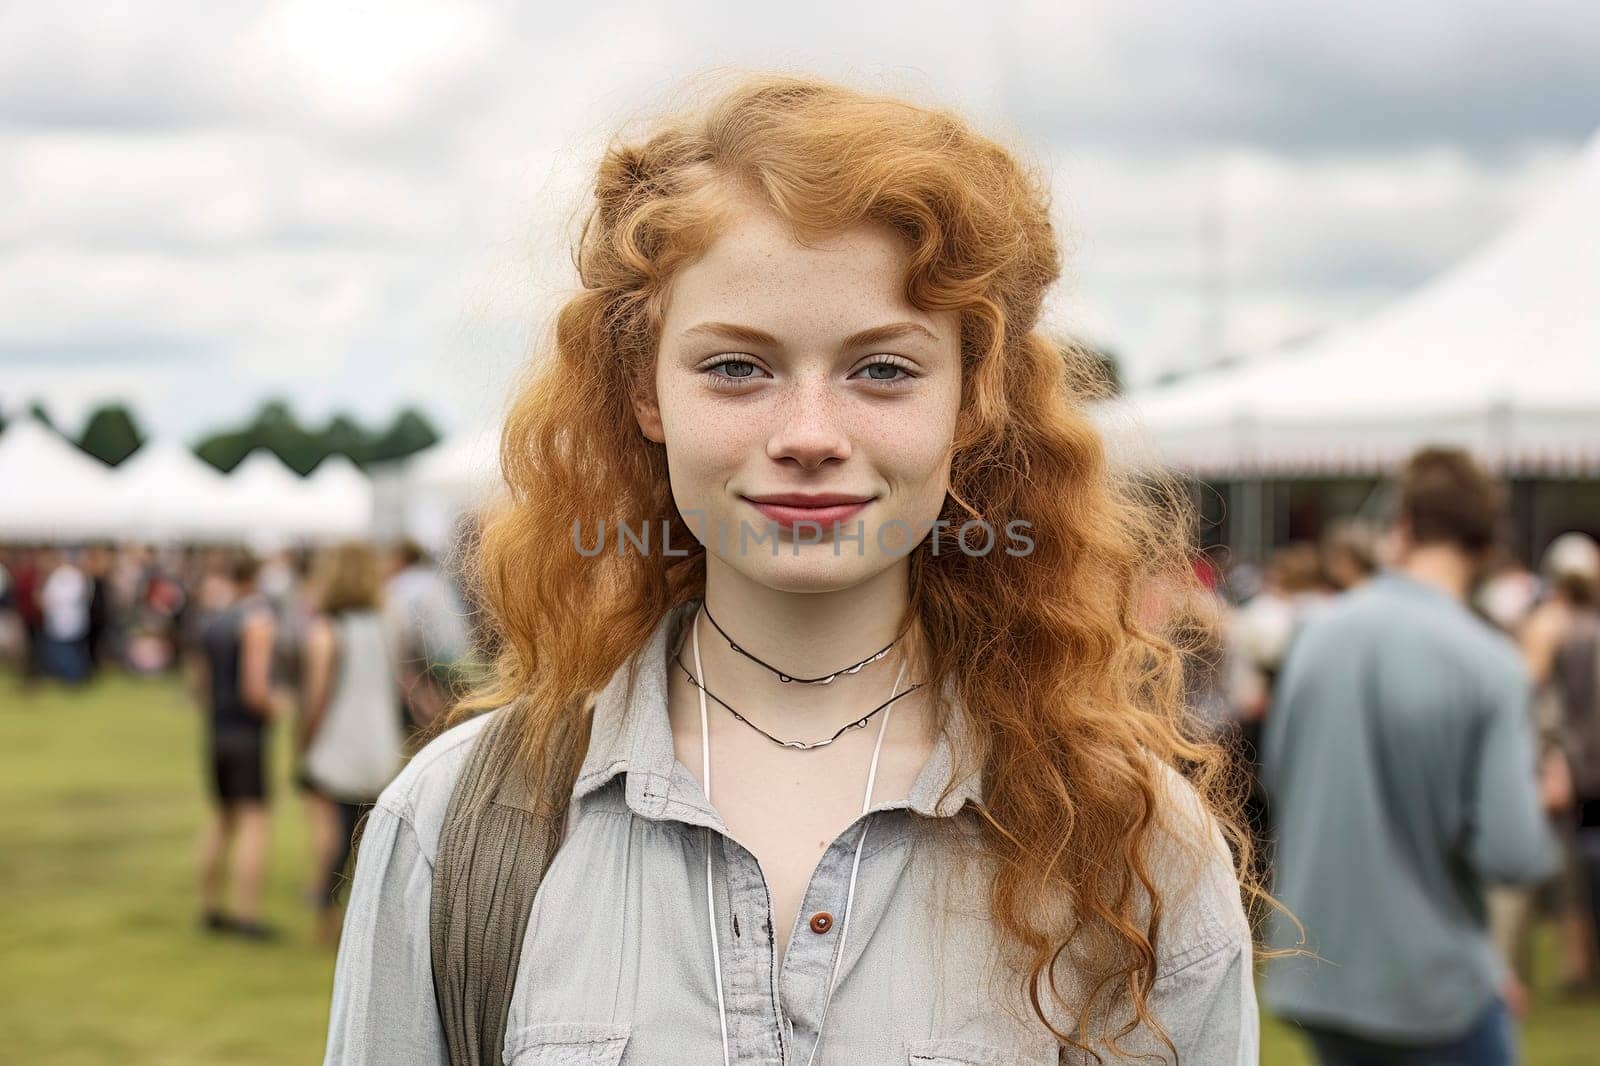 Smiling Redhead Girl at Outdoor Party by pippocarlot